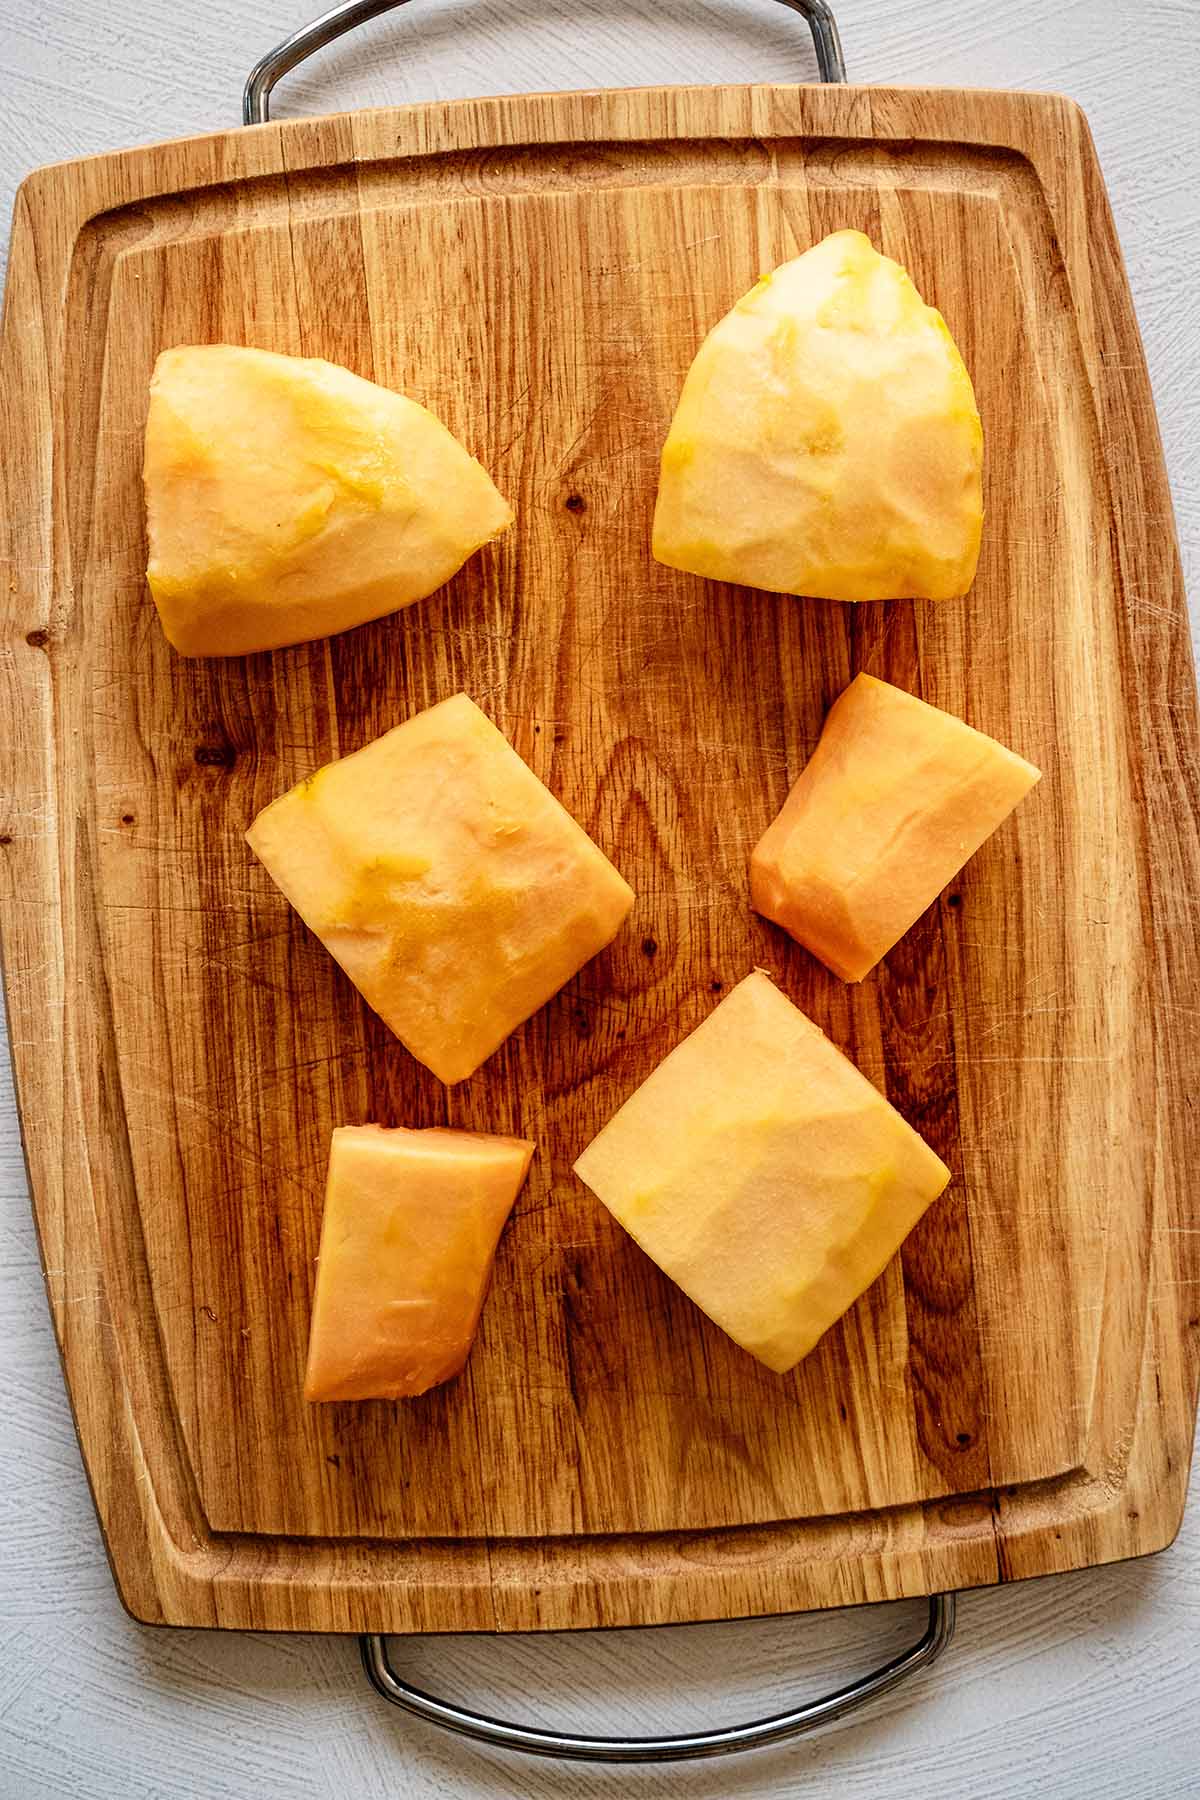 Large pieces of peeled papaya on a cutting board.